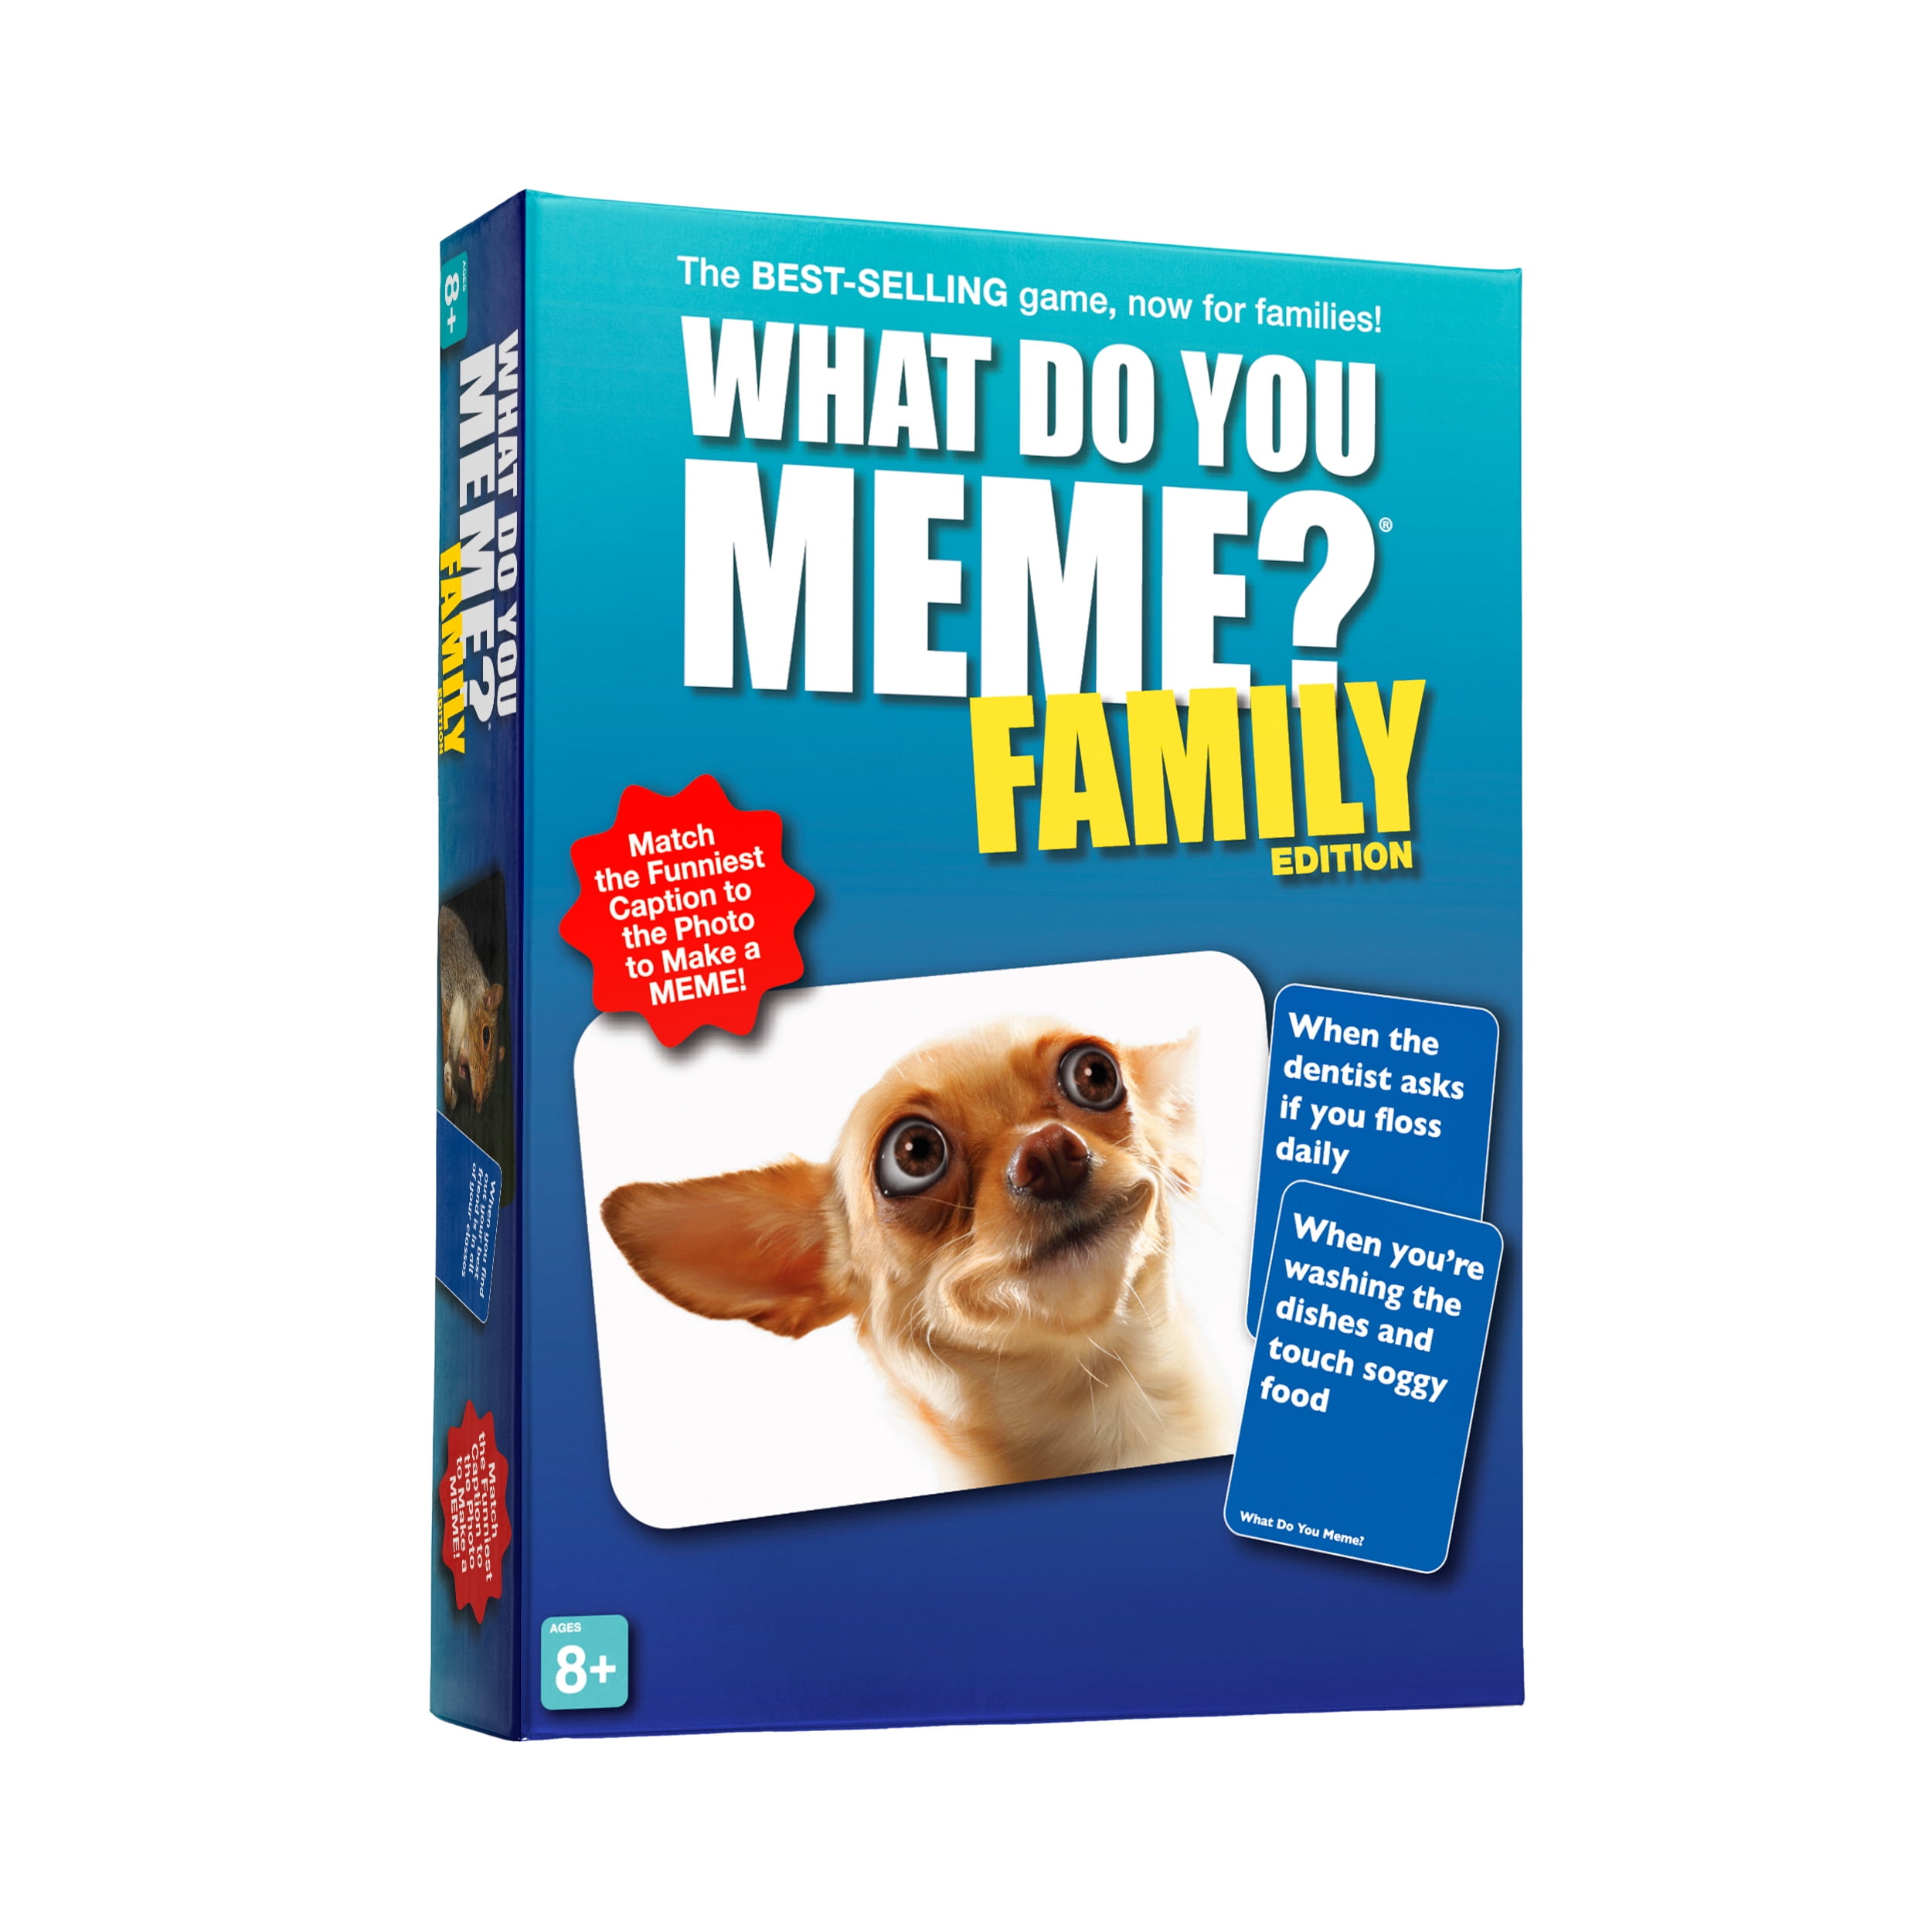 What Do You Meme? Family Edition - The Hilarious Family Card Game for Meme Lovers